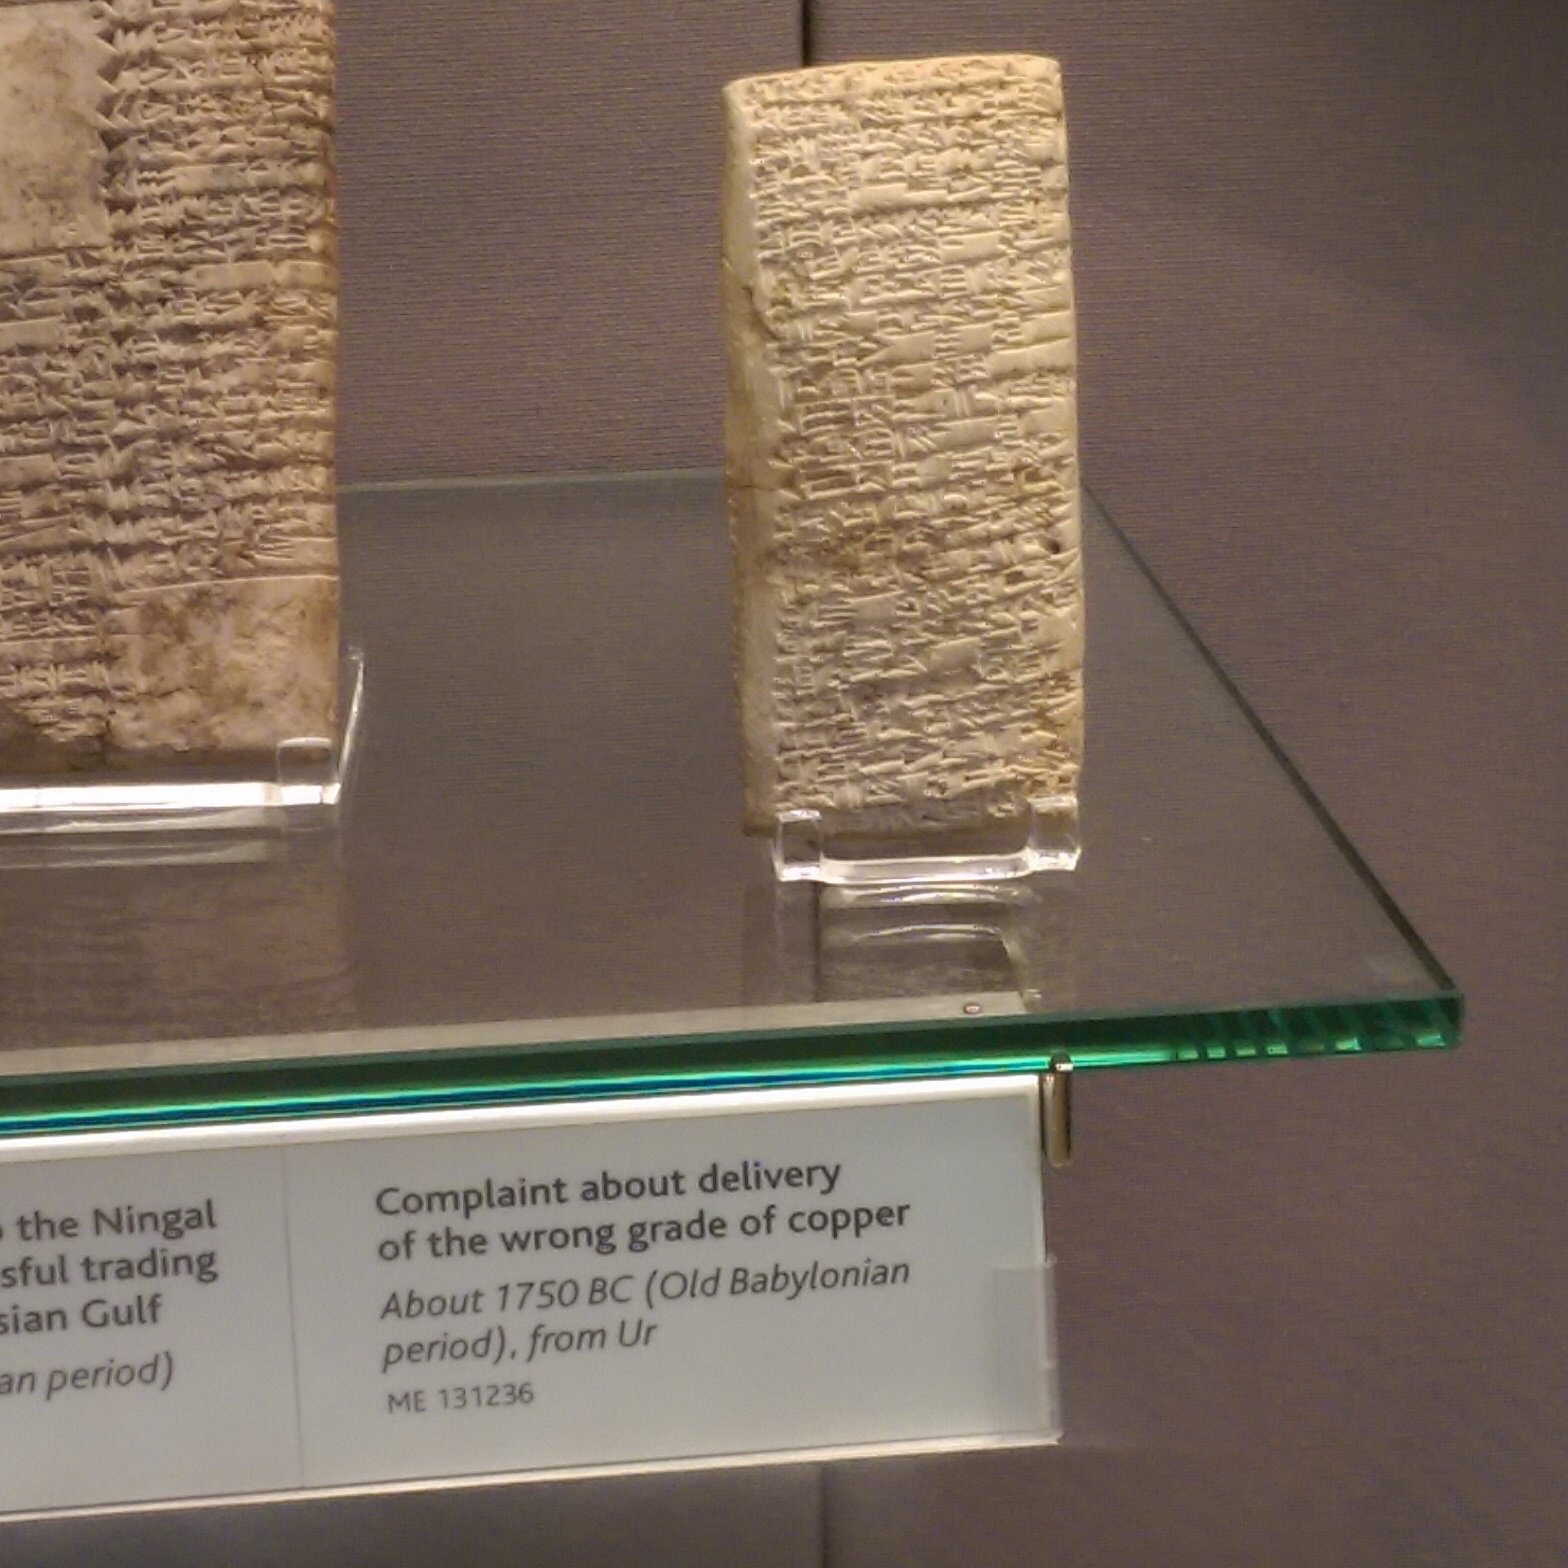 complaint tablet to ea nasir - the Ningal sful trading sian Gulf an period Complaint about delivery of the wrong grade of copper About 1750 Bc Old Babylonian period. from Ur Me 131236